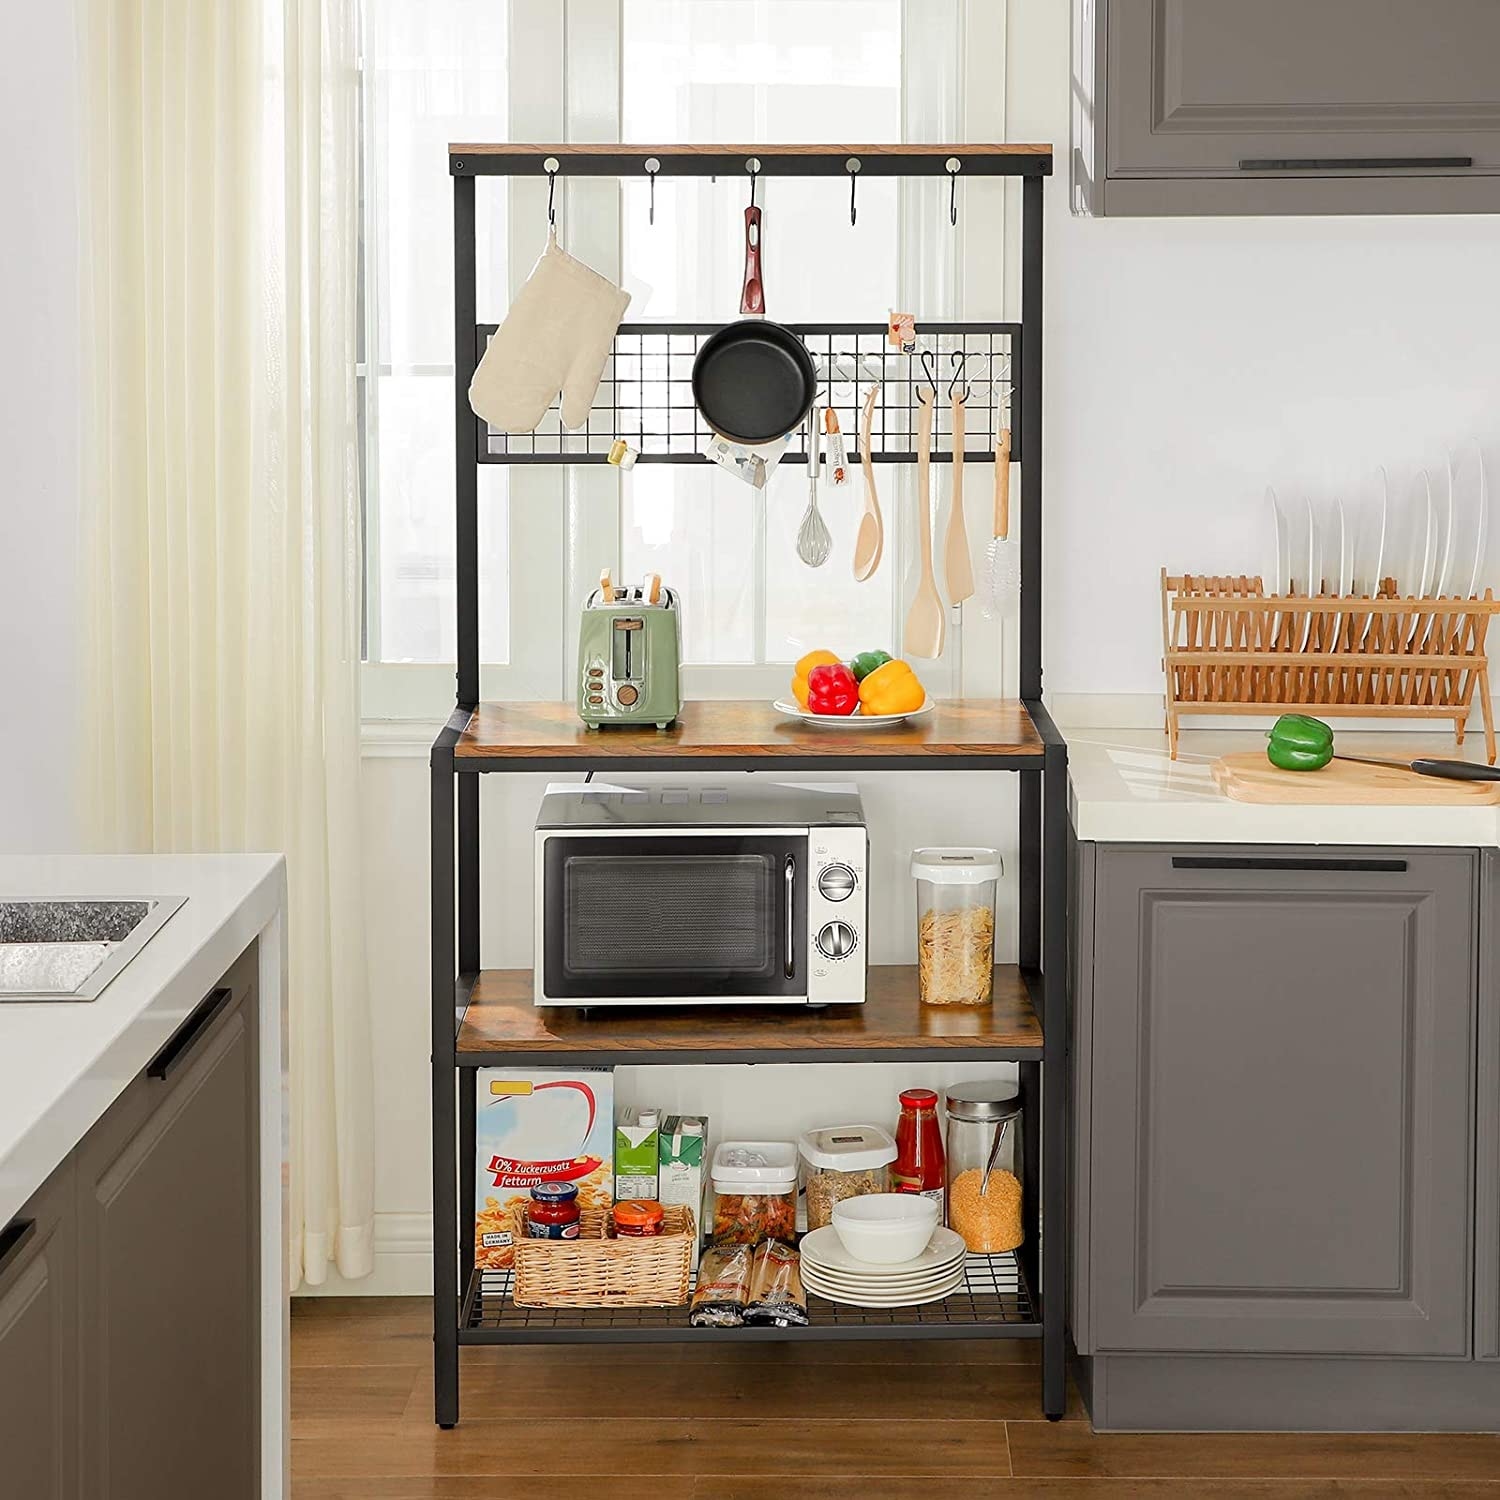 https://ak1.ostkcdn.com/images/products/is/images/direct/c9c2416b5b940594bdb04e17e7a4f4a9d1b07f55/Bakers-Rack%2C-Coffee-Bar%2C-Kitchen-Storage-Shelf-Rack-with-10-Hooks%2C-3-Shelves%2C-Adjustable-Feet%2C-for-Microwave-Oven.jpg